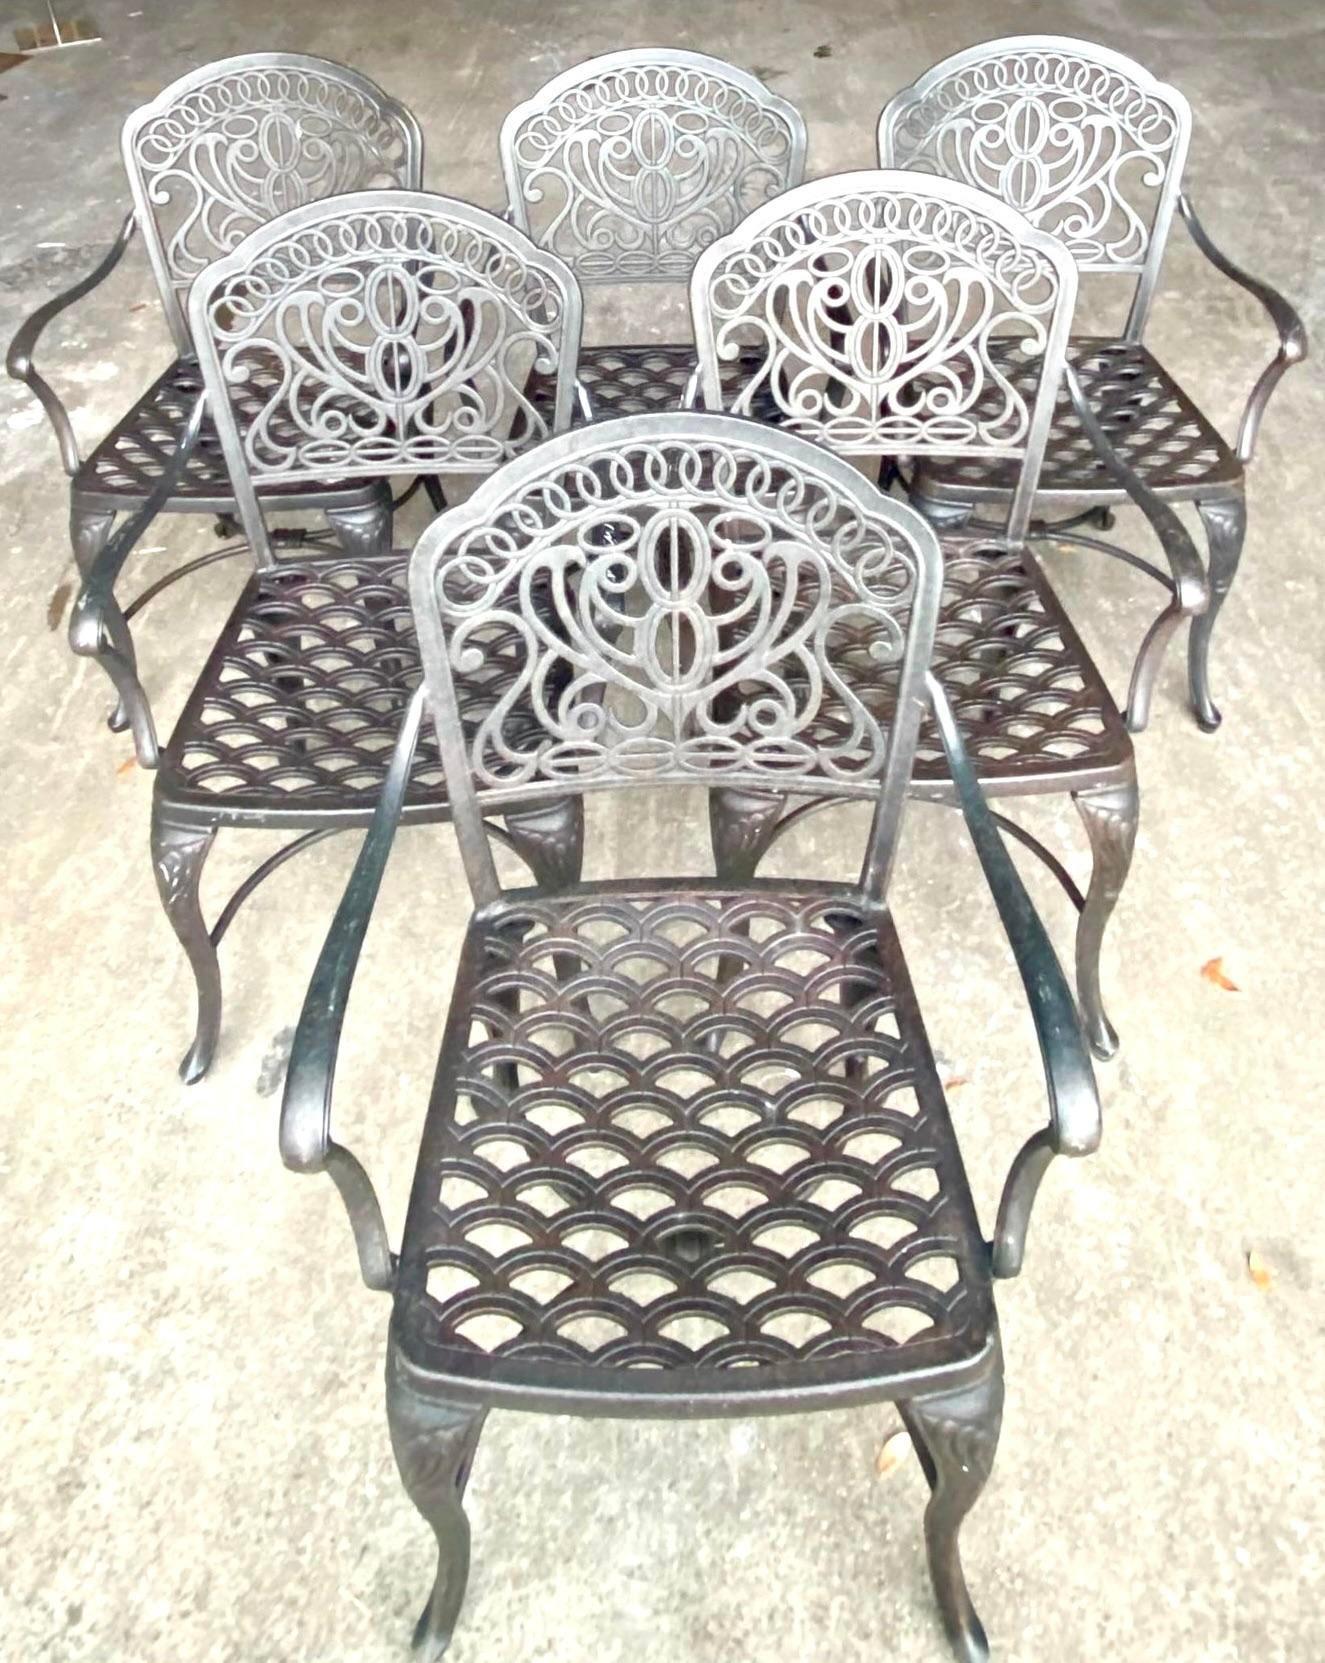 Vintage Coastal Hanamint Cast Aluminum Outdoor Dining Chairs - Set of 6 For Sale 1